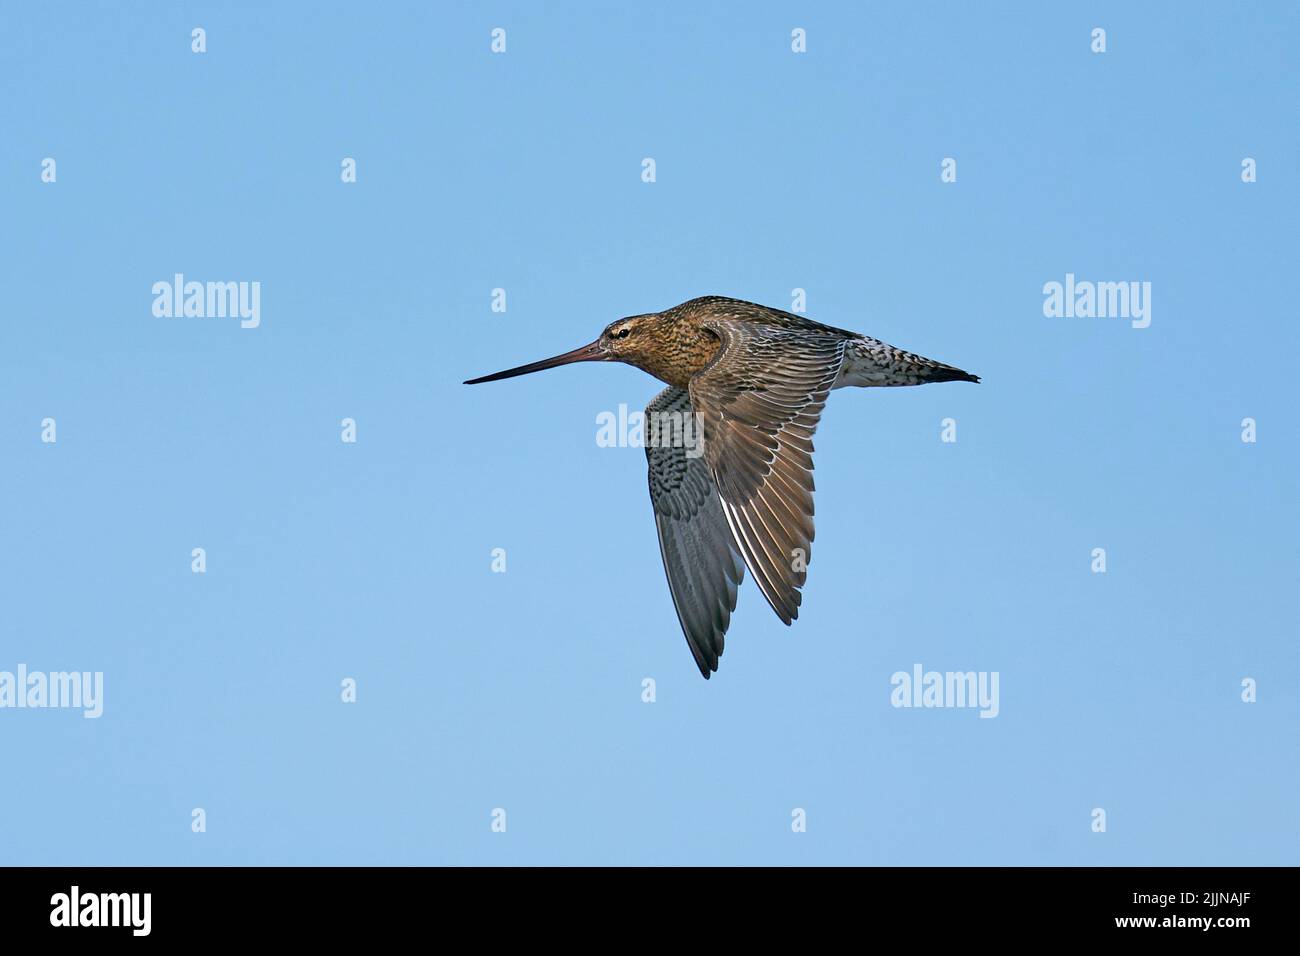 Bar-tailed godwit in flight in its natural enviroment in Denmark Stock Photo